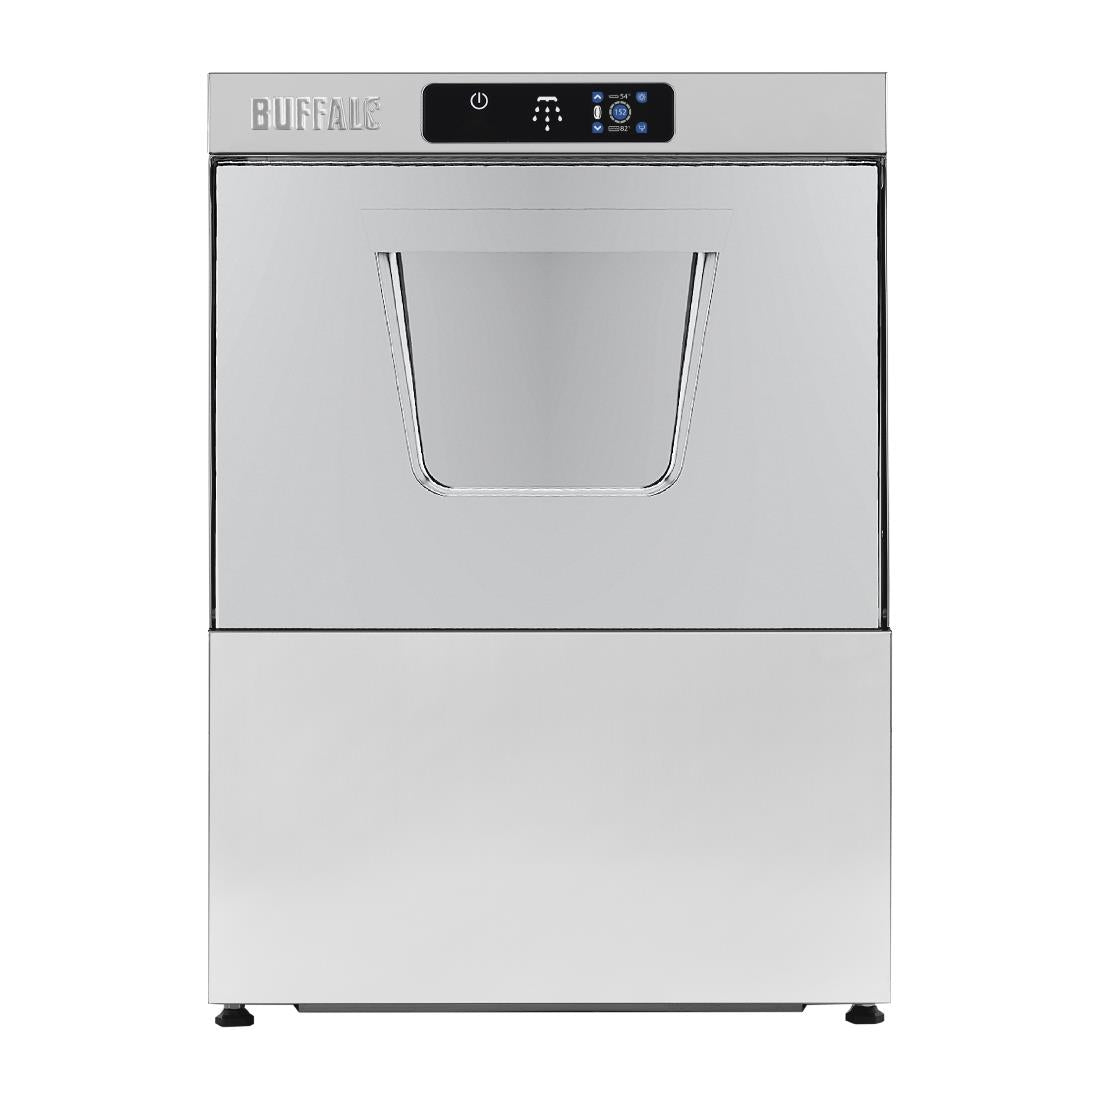 (Available 21/01/24) DK774 Buffalo Digital Undercounter Dishwasher 500mm Basket 2.9kW Single Phase JD Catering Equipment Solutions Ltd